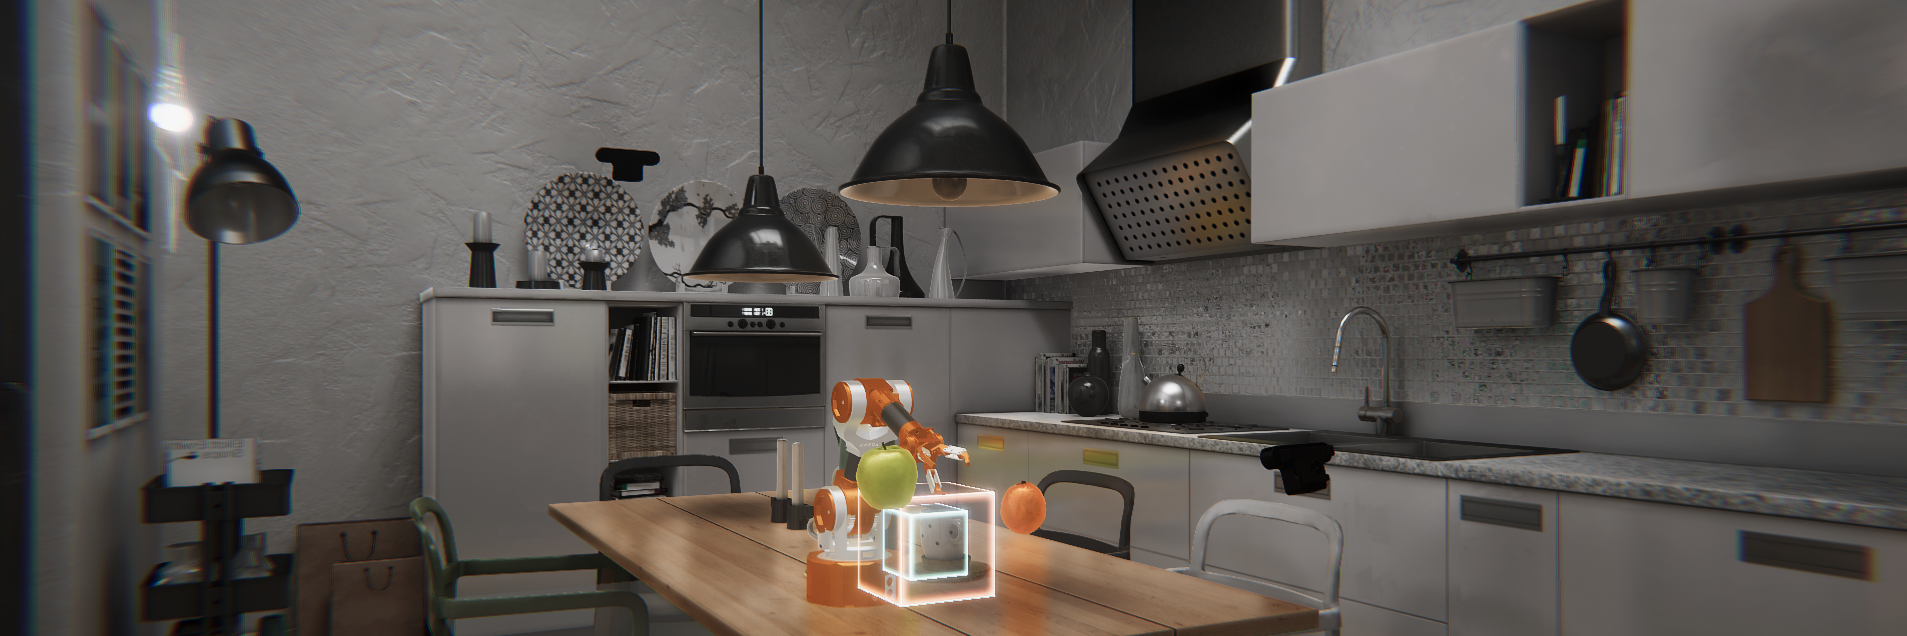 kitchen digital twin with a robot on a dining table